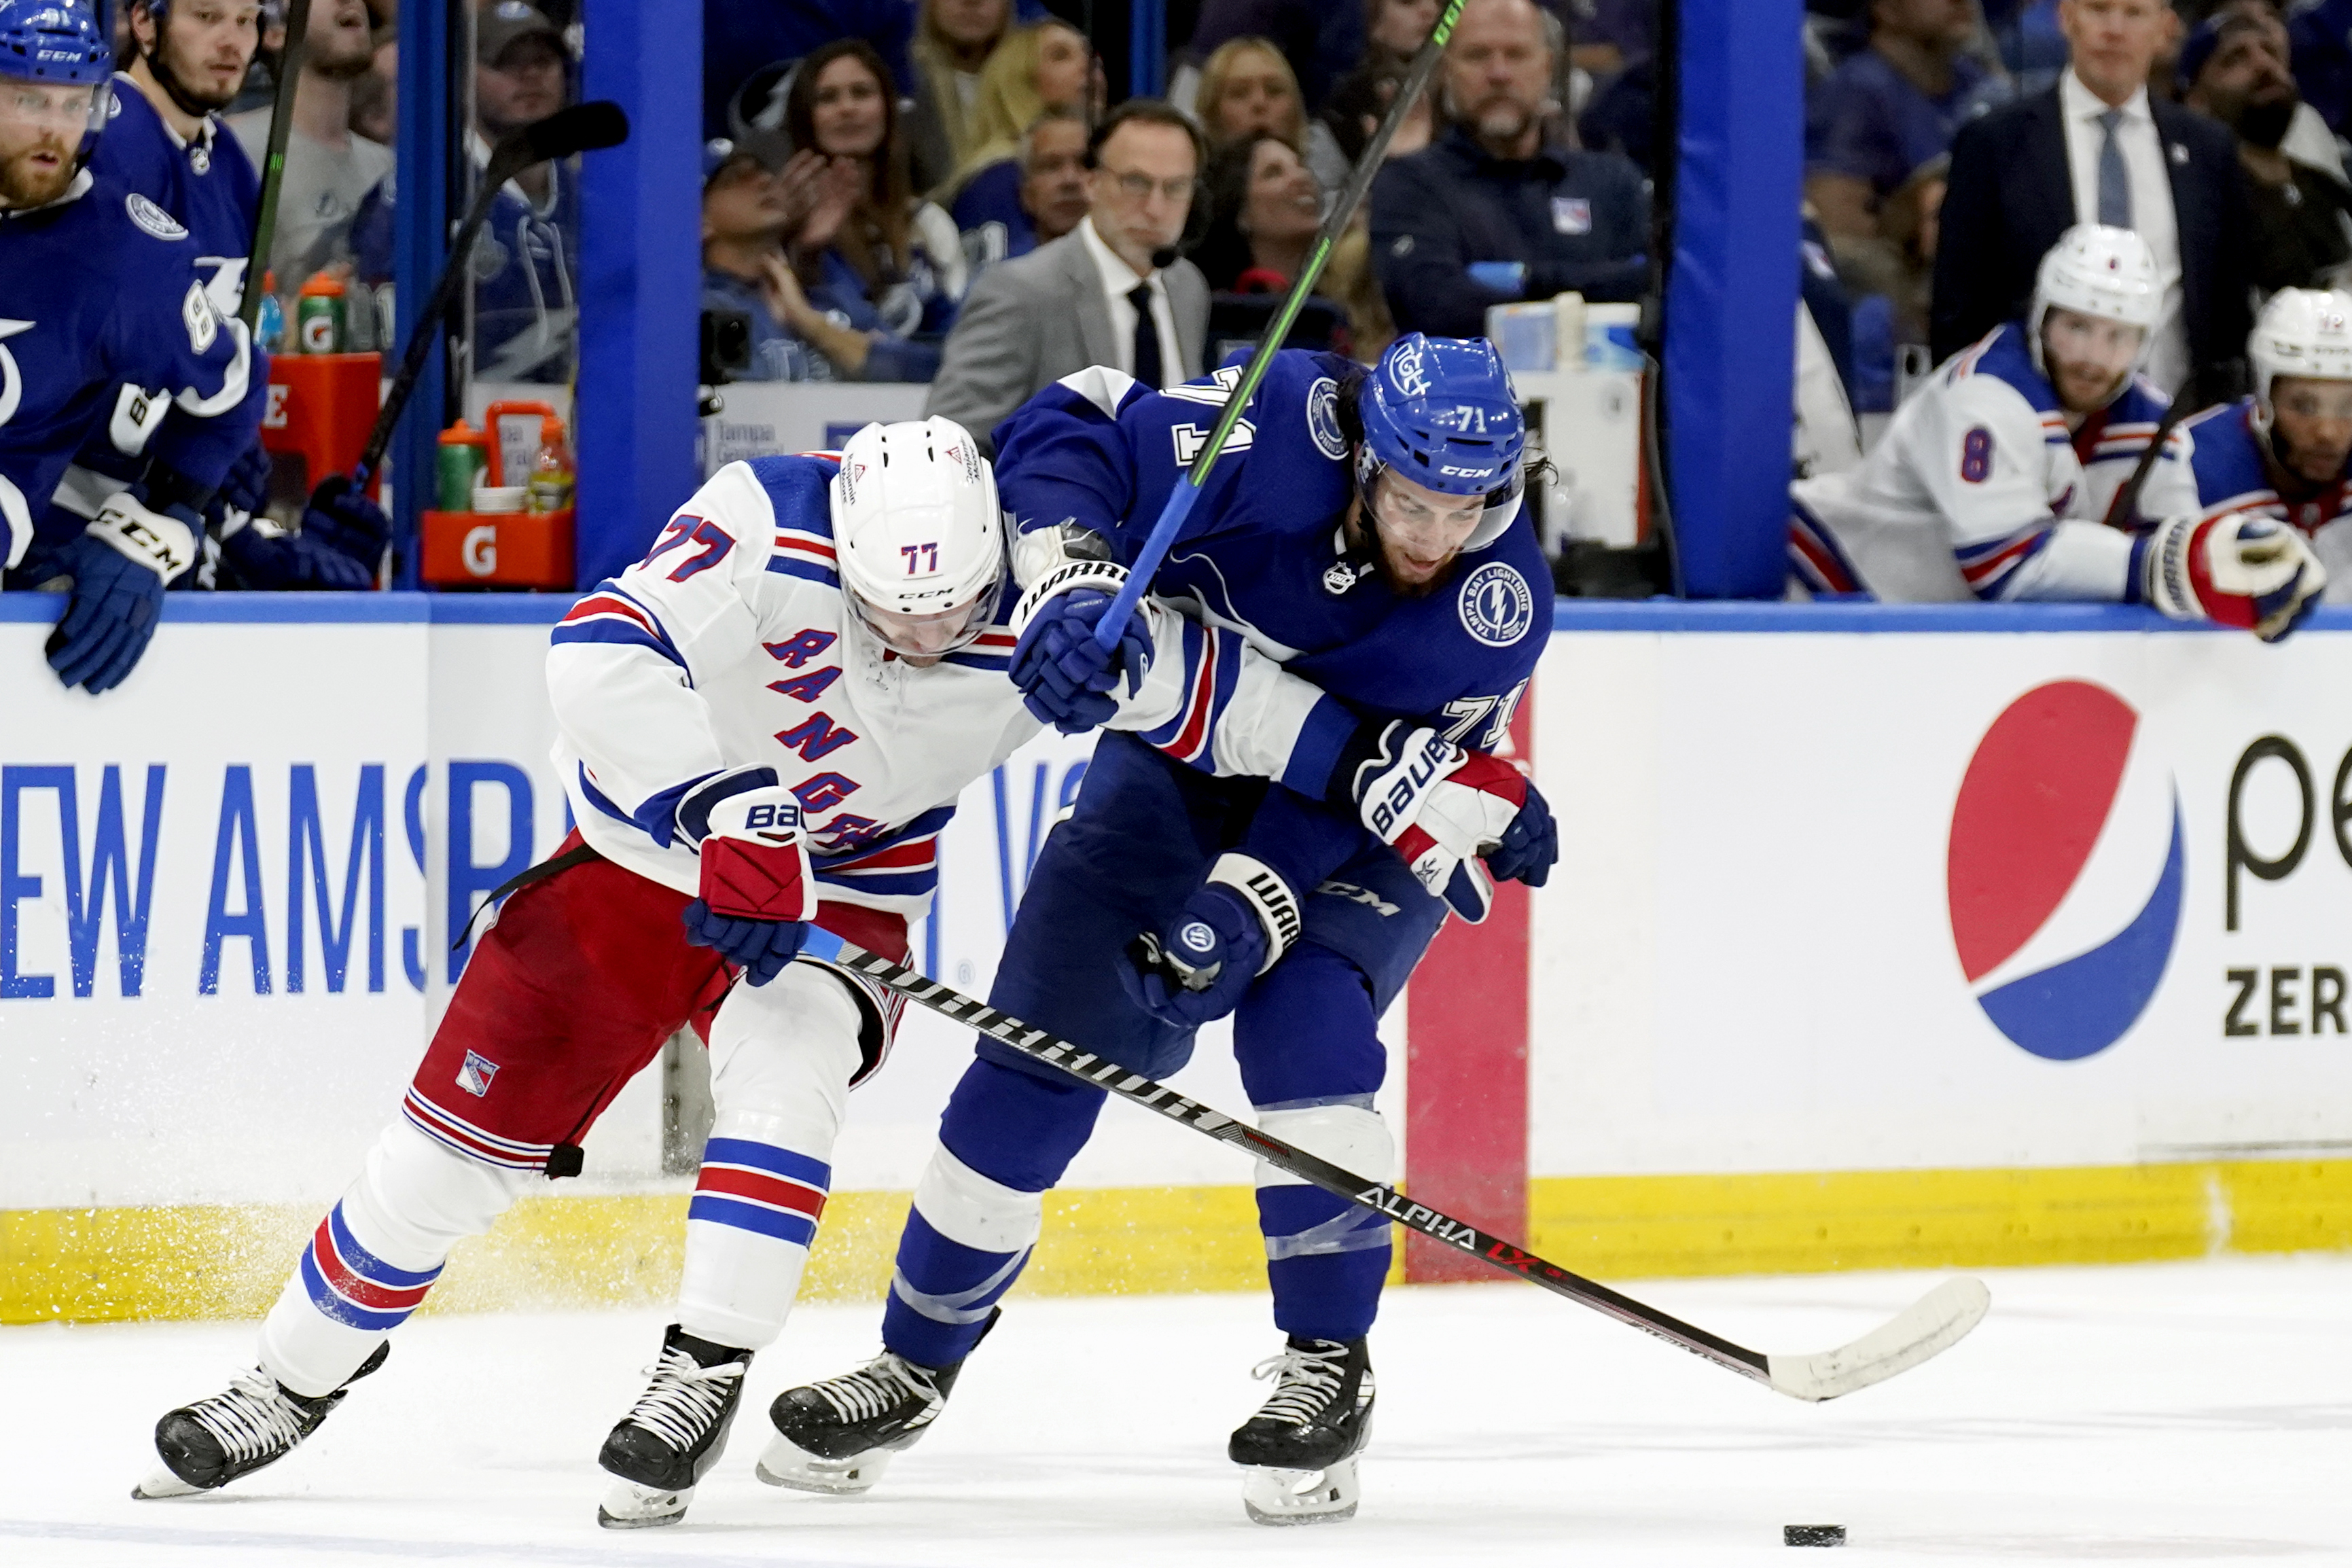 Lightning vs. Rangers live stream: TV channel, how to watch